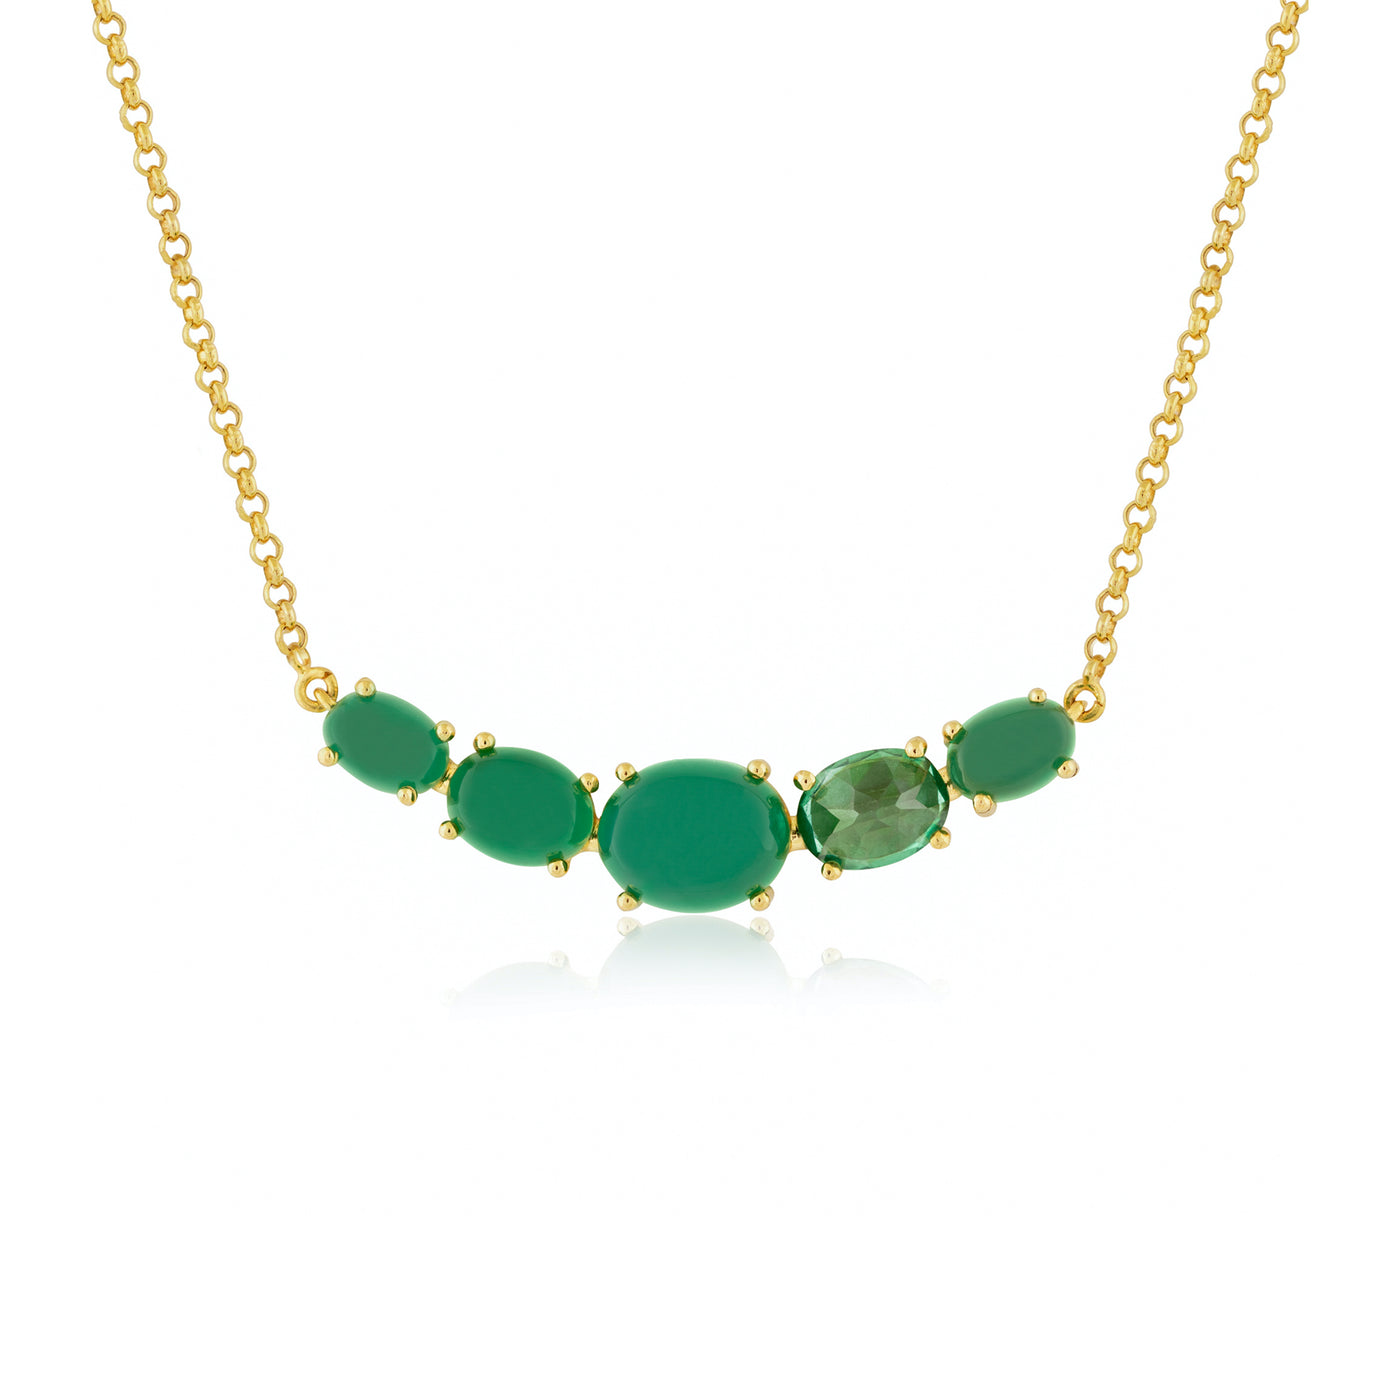 fine jewelry necklace in gold with green agate and emerald gemstones from Atelier ORMAN